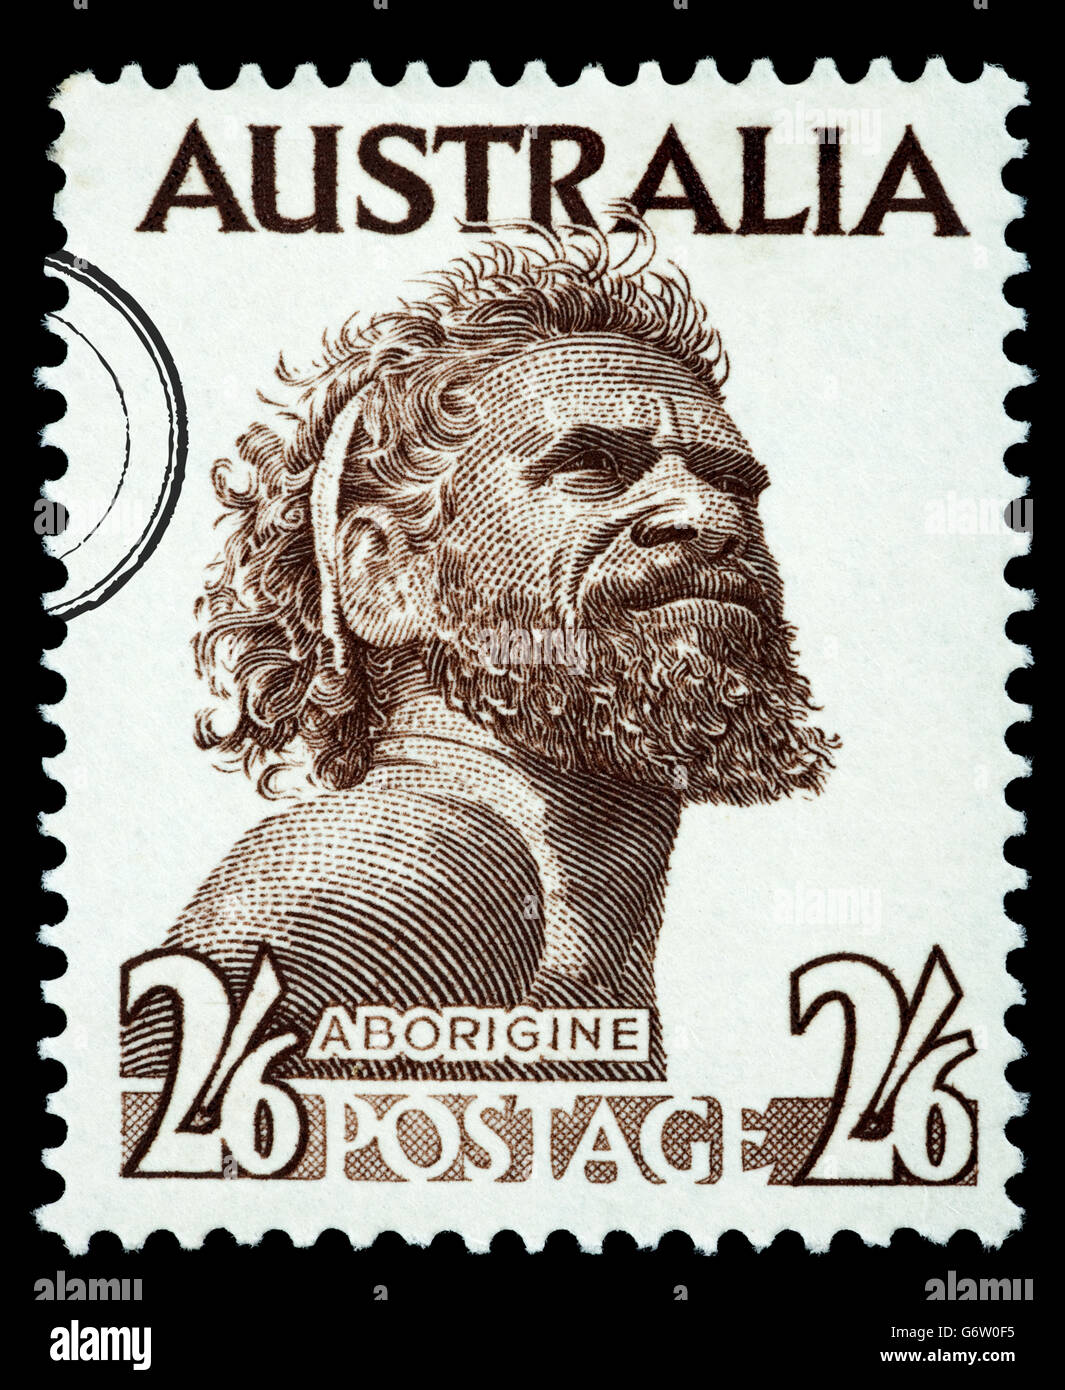 A postage stamp printed in the Australia showing an Aborigine Man Stock Photo